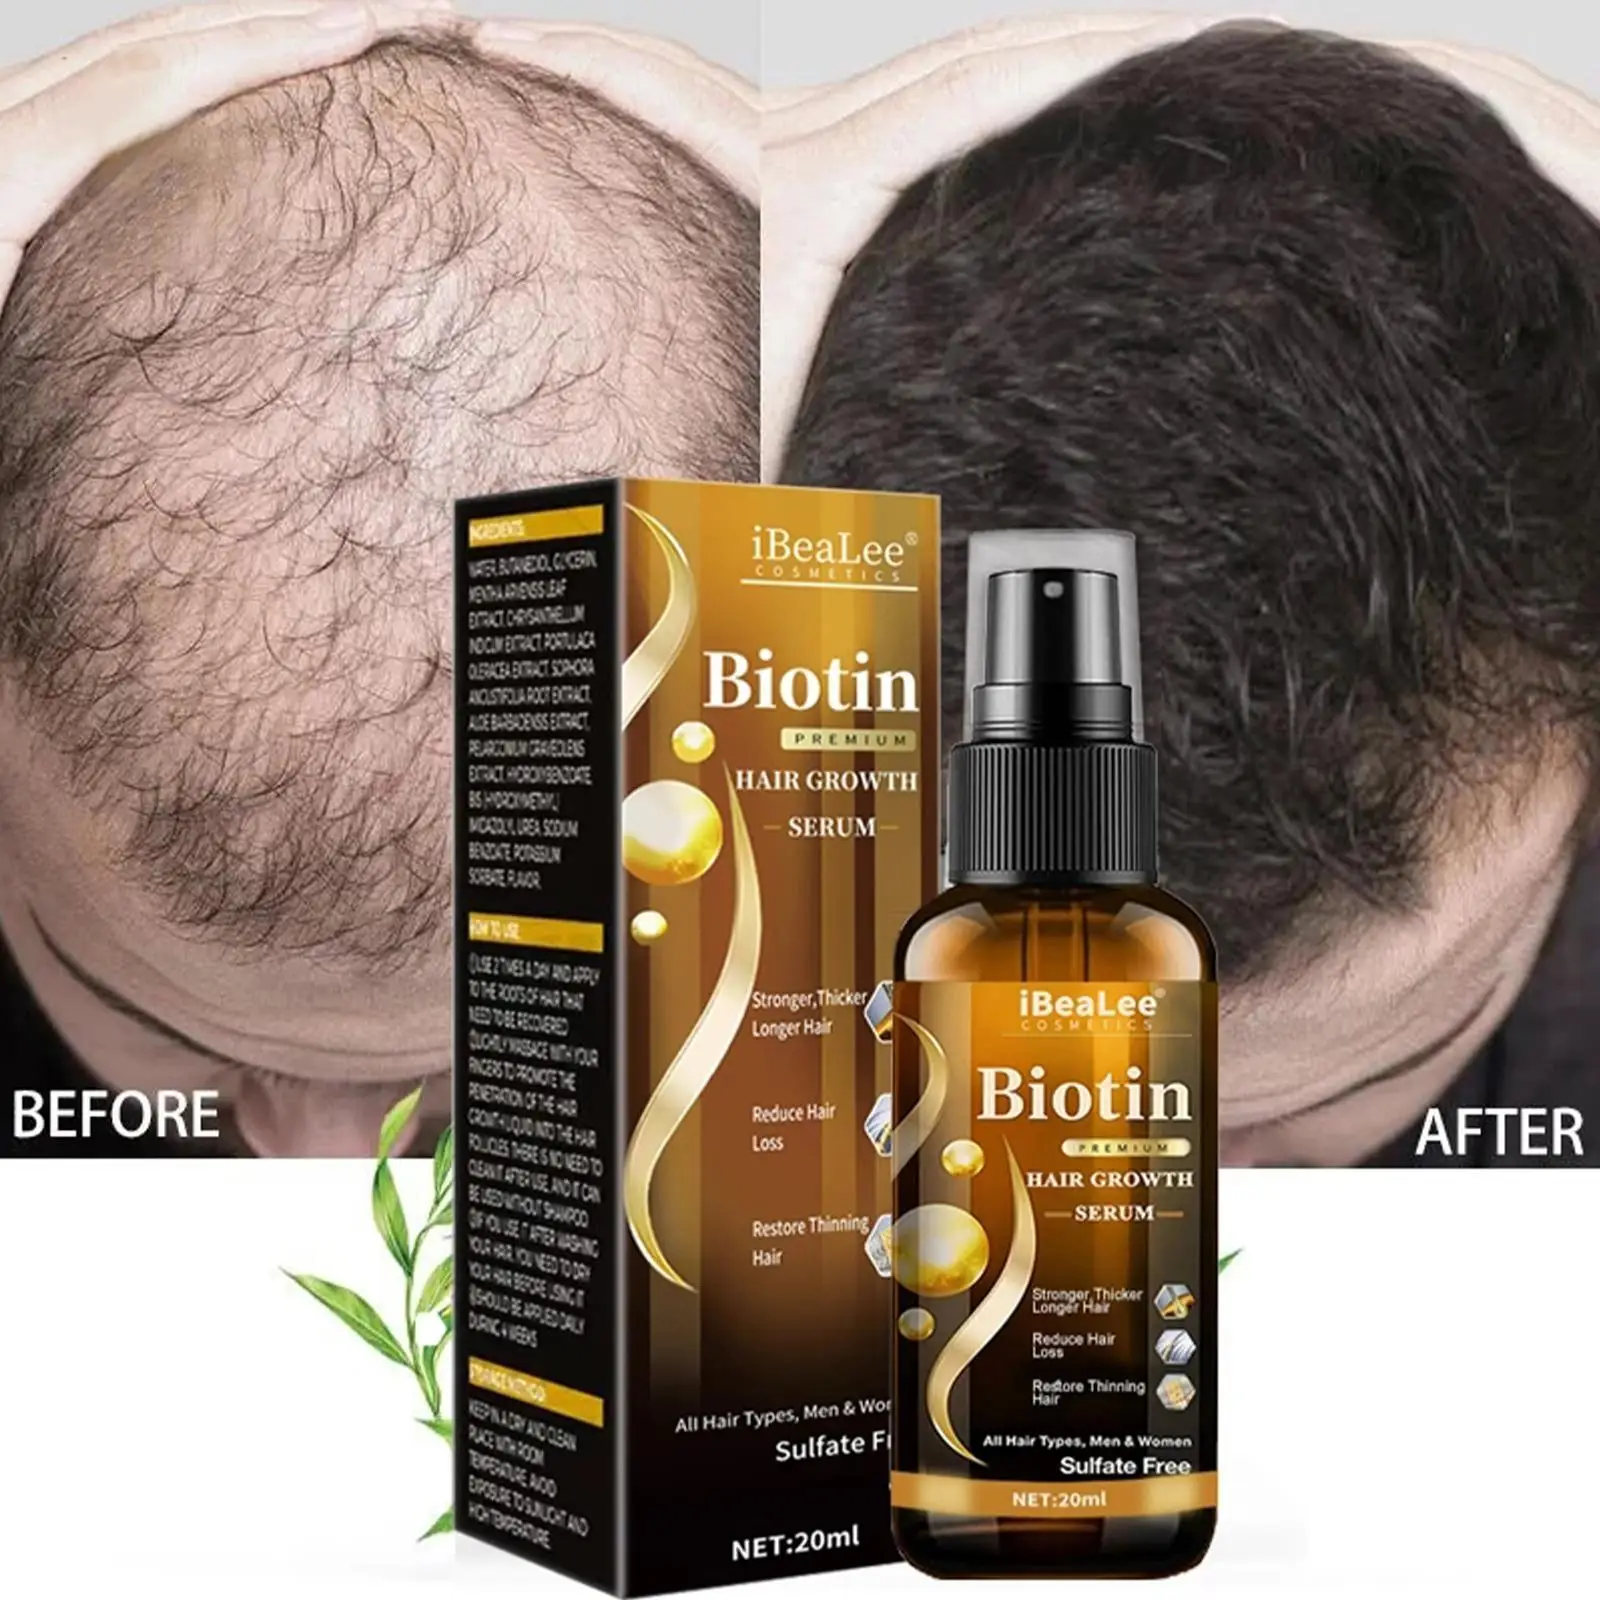 

iBeaLee Hair Growth Products Biotin Anti Hair Loss Spray Scalp Treatment Fast Growing Hair Care Essential Oils For Men Women